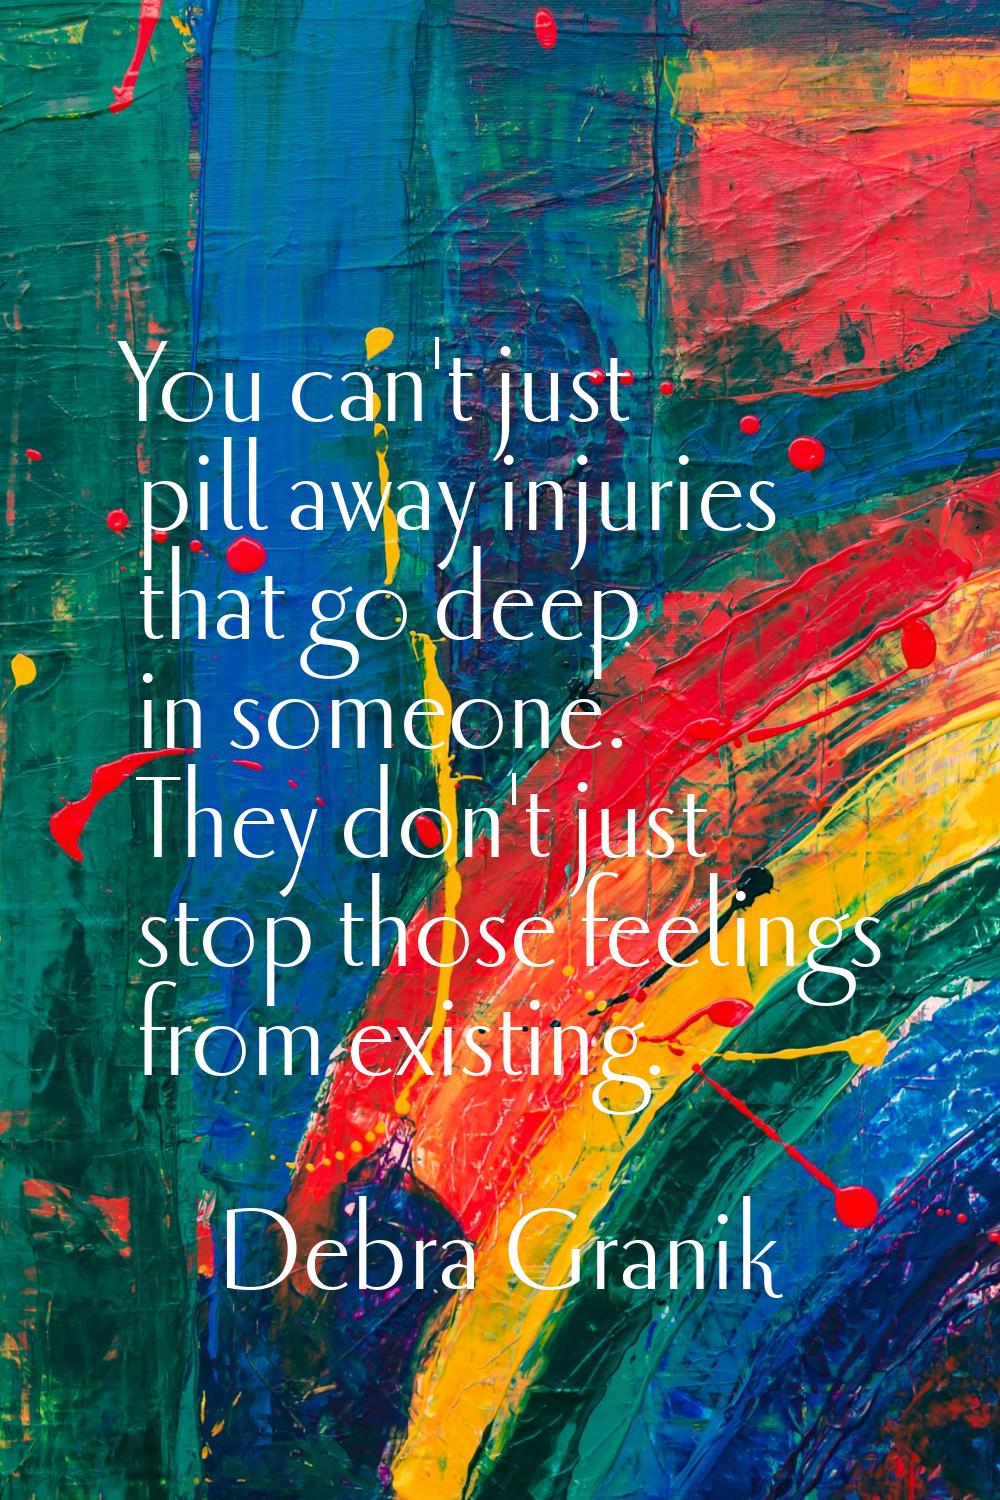 You can't just pill away injuries that go deep in someone. They don't just stop those feelings from